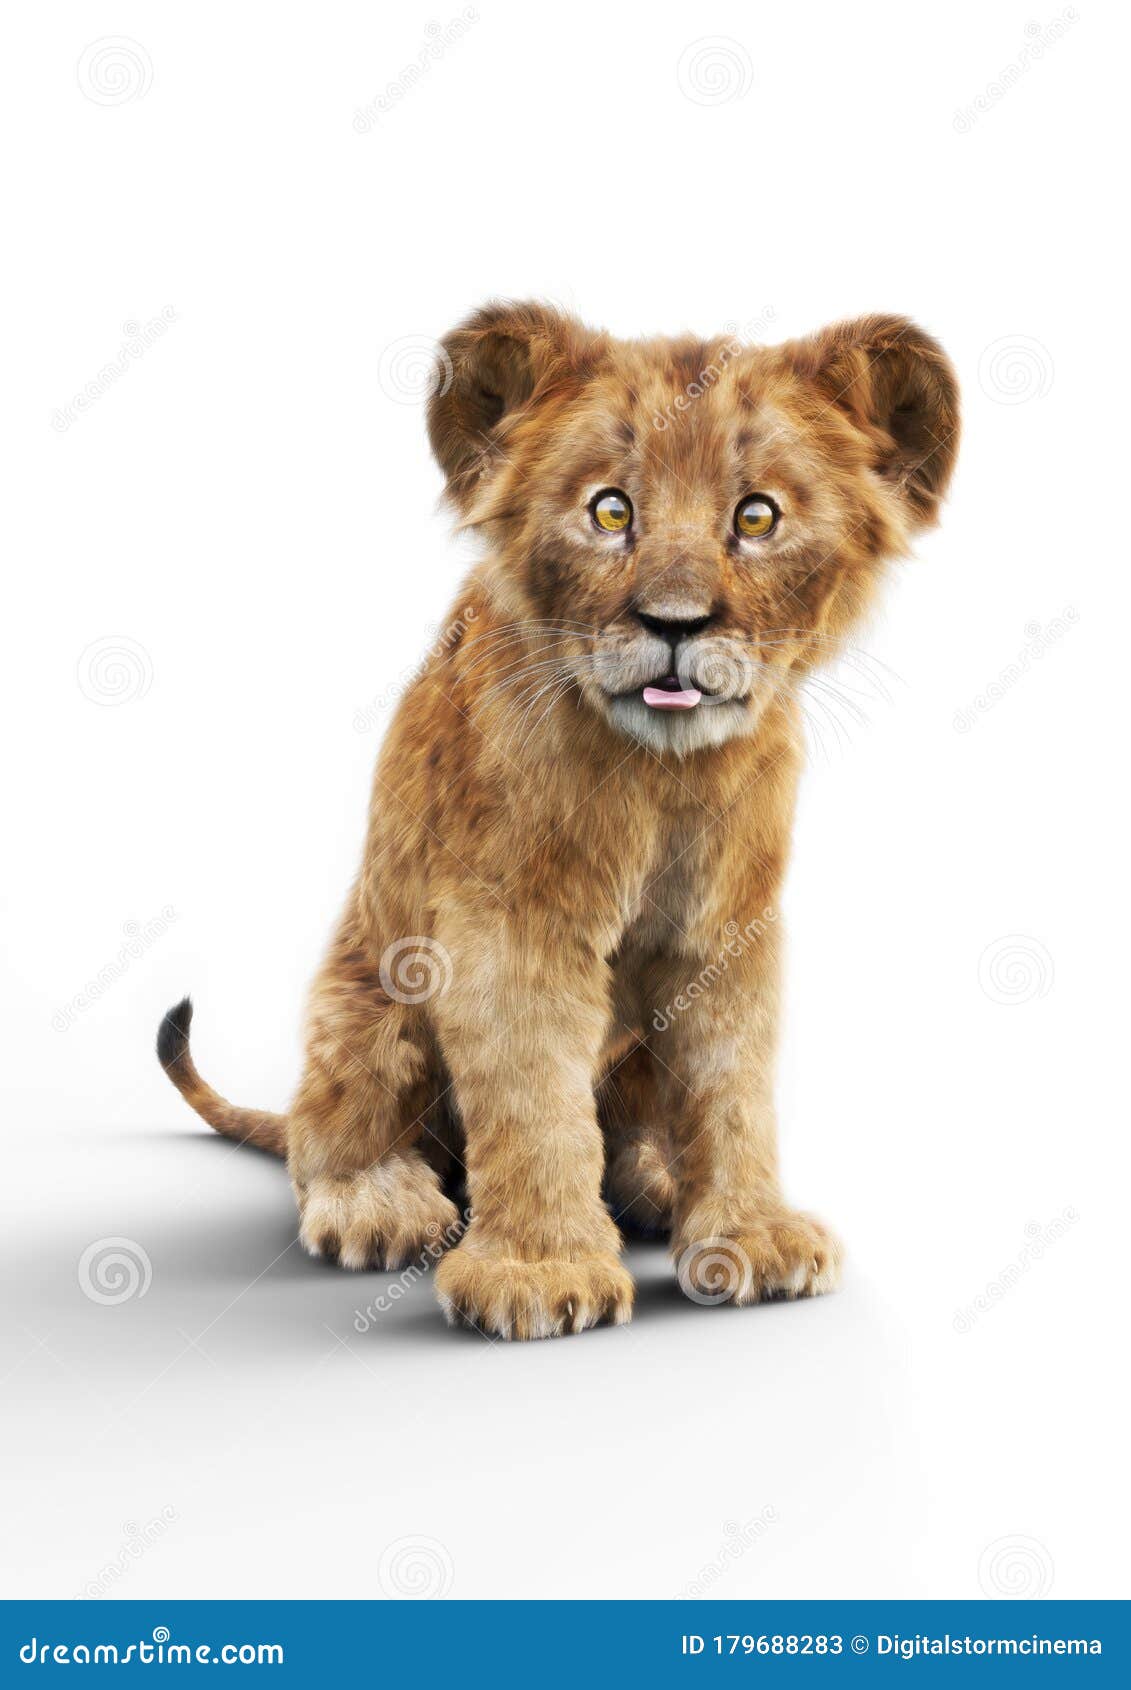 Portrait of a Adorable Lion Cub Sticking His Tongue Out on a White ...